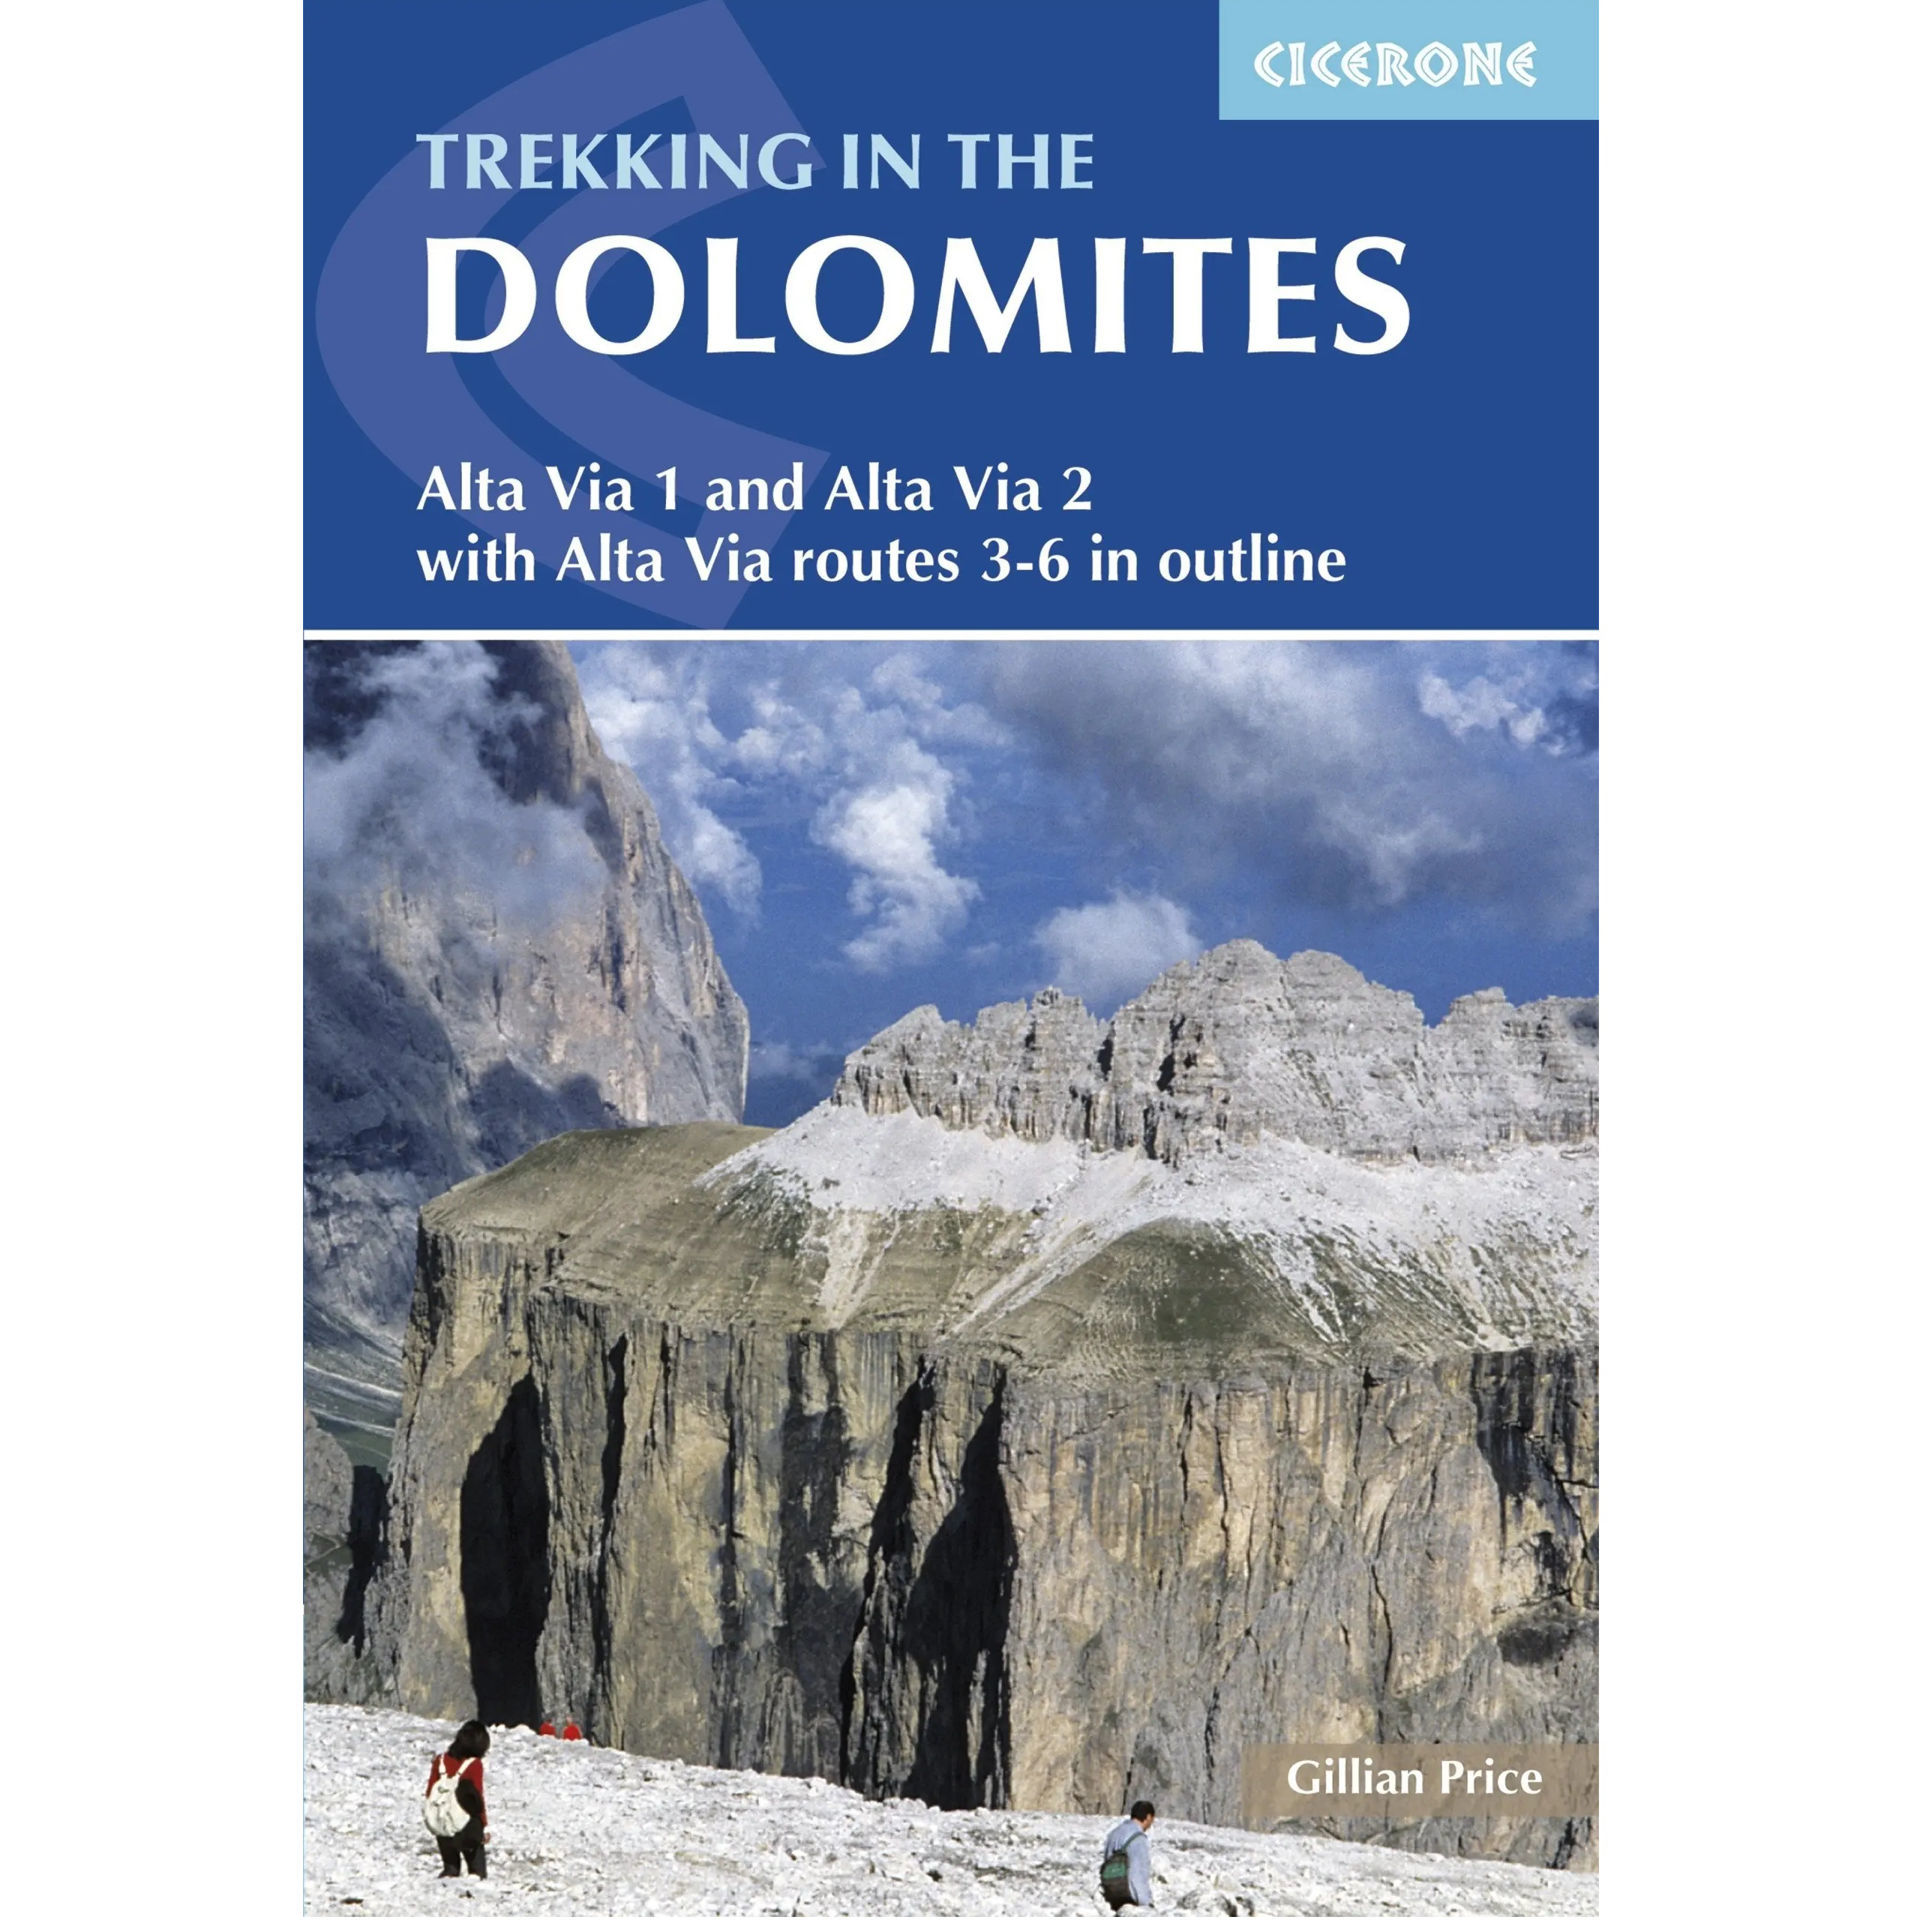 Cicerone Trekking In The Dolomites Alta Via 1 and Alt Via 2 with Alta Via routes 3-6 in outline